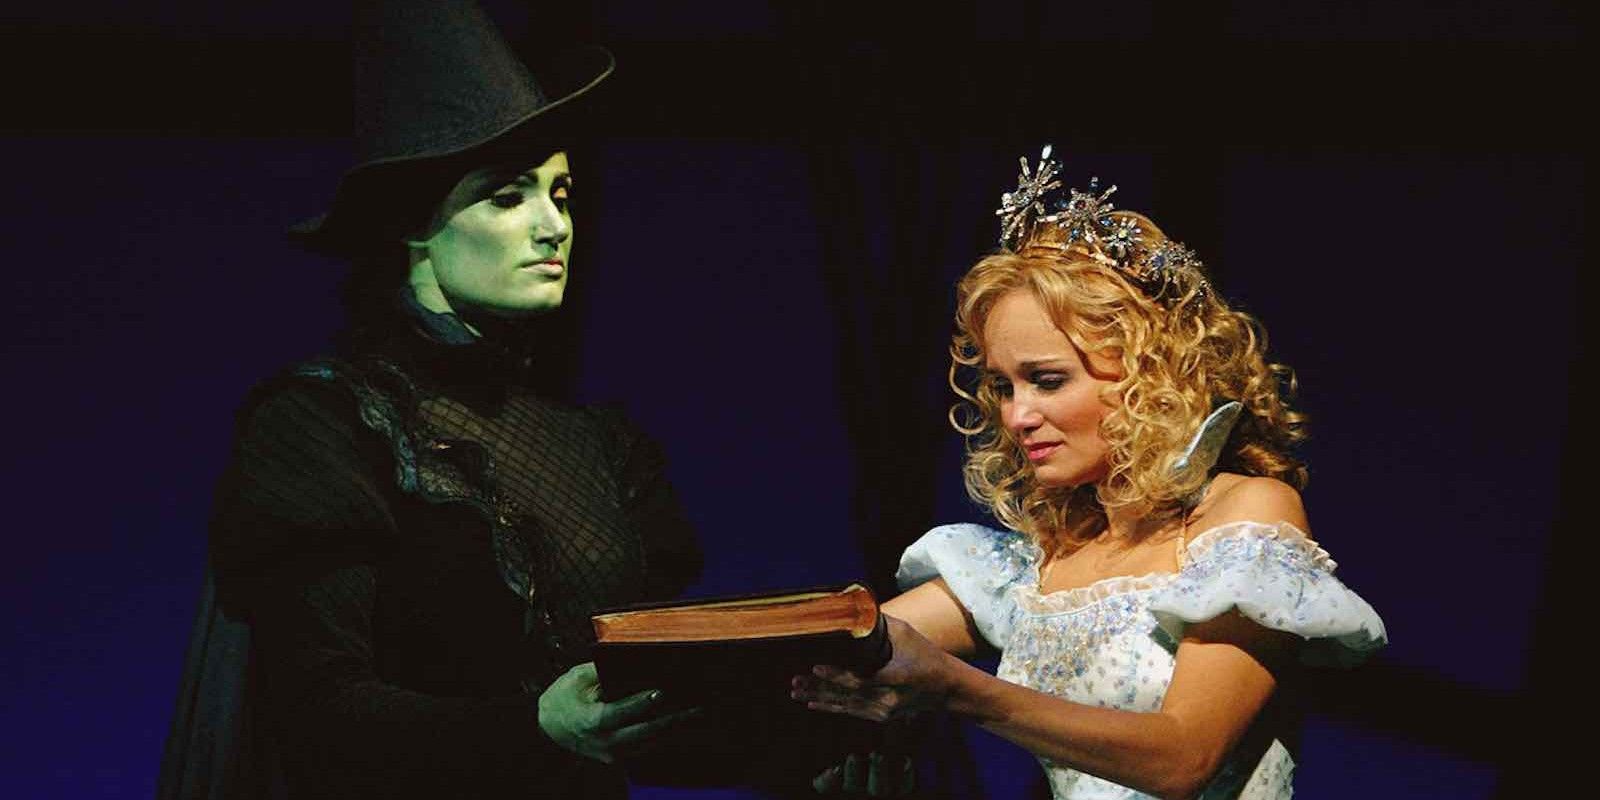 Idina Menzel and Kristin Chenoweth in Wicked musical